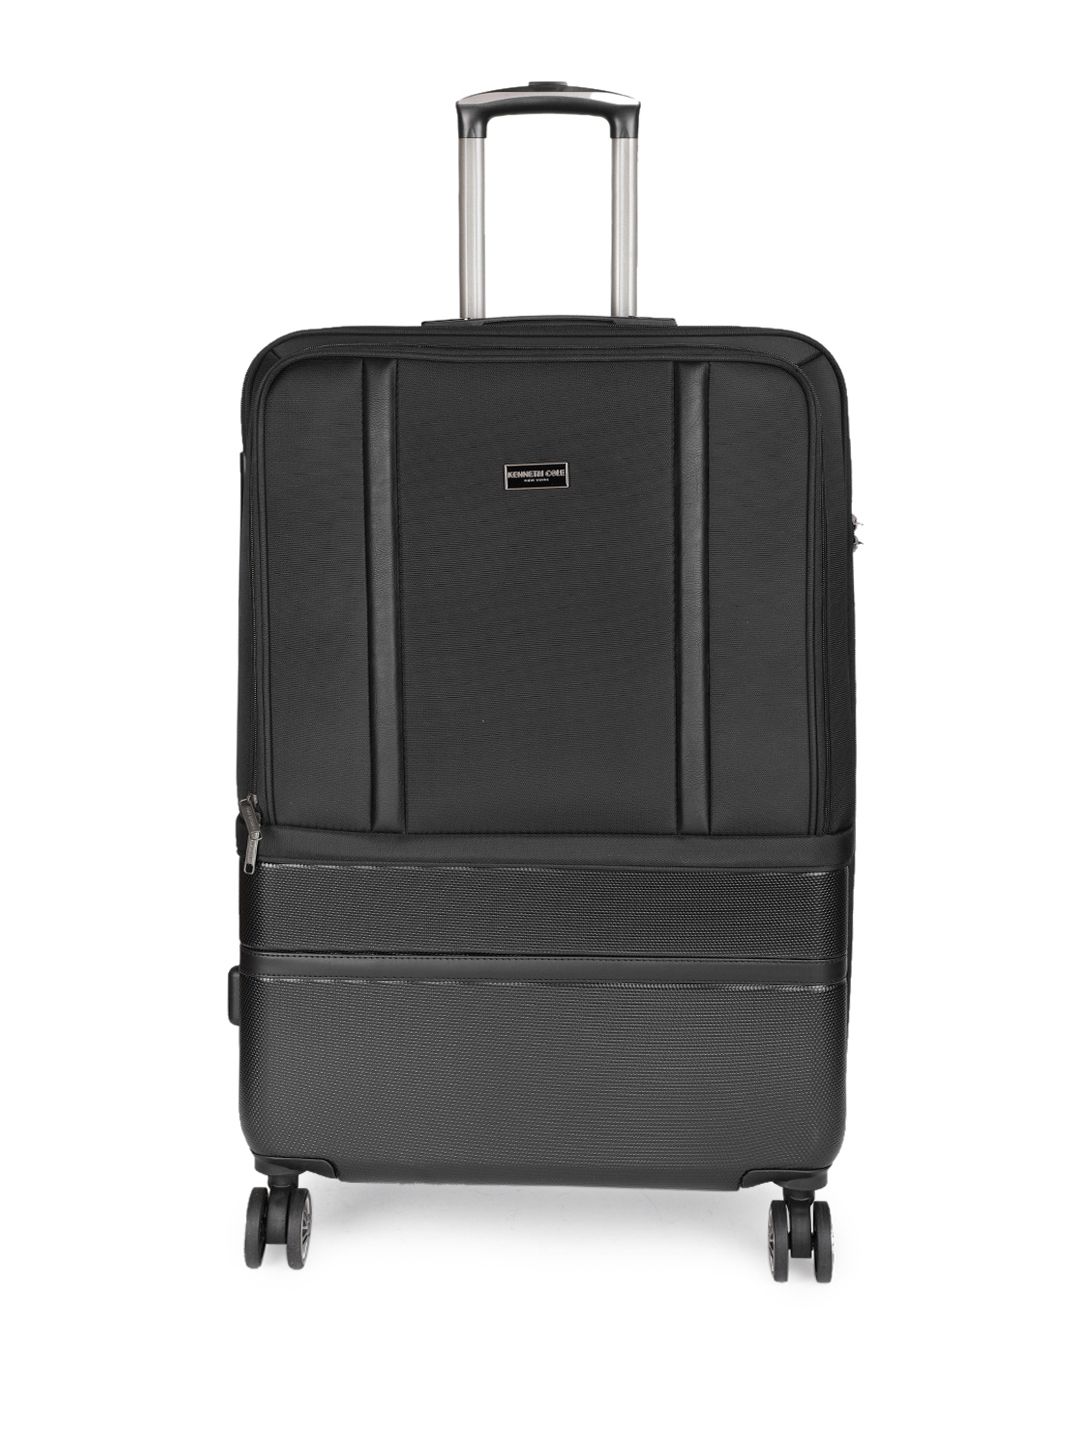 Kenneth Cole Black New York 24" Medium Trolley Suitcase Price in India